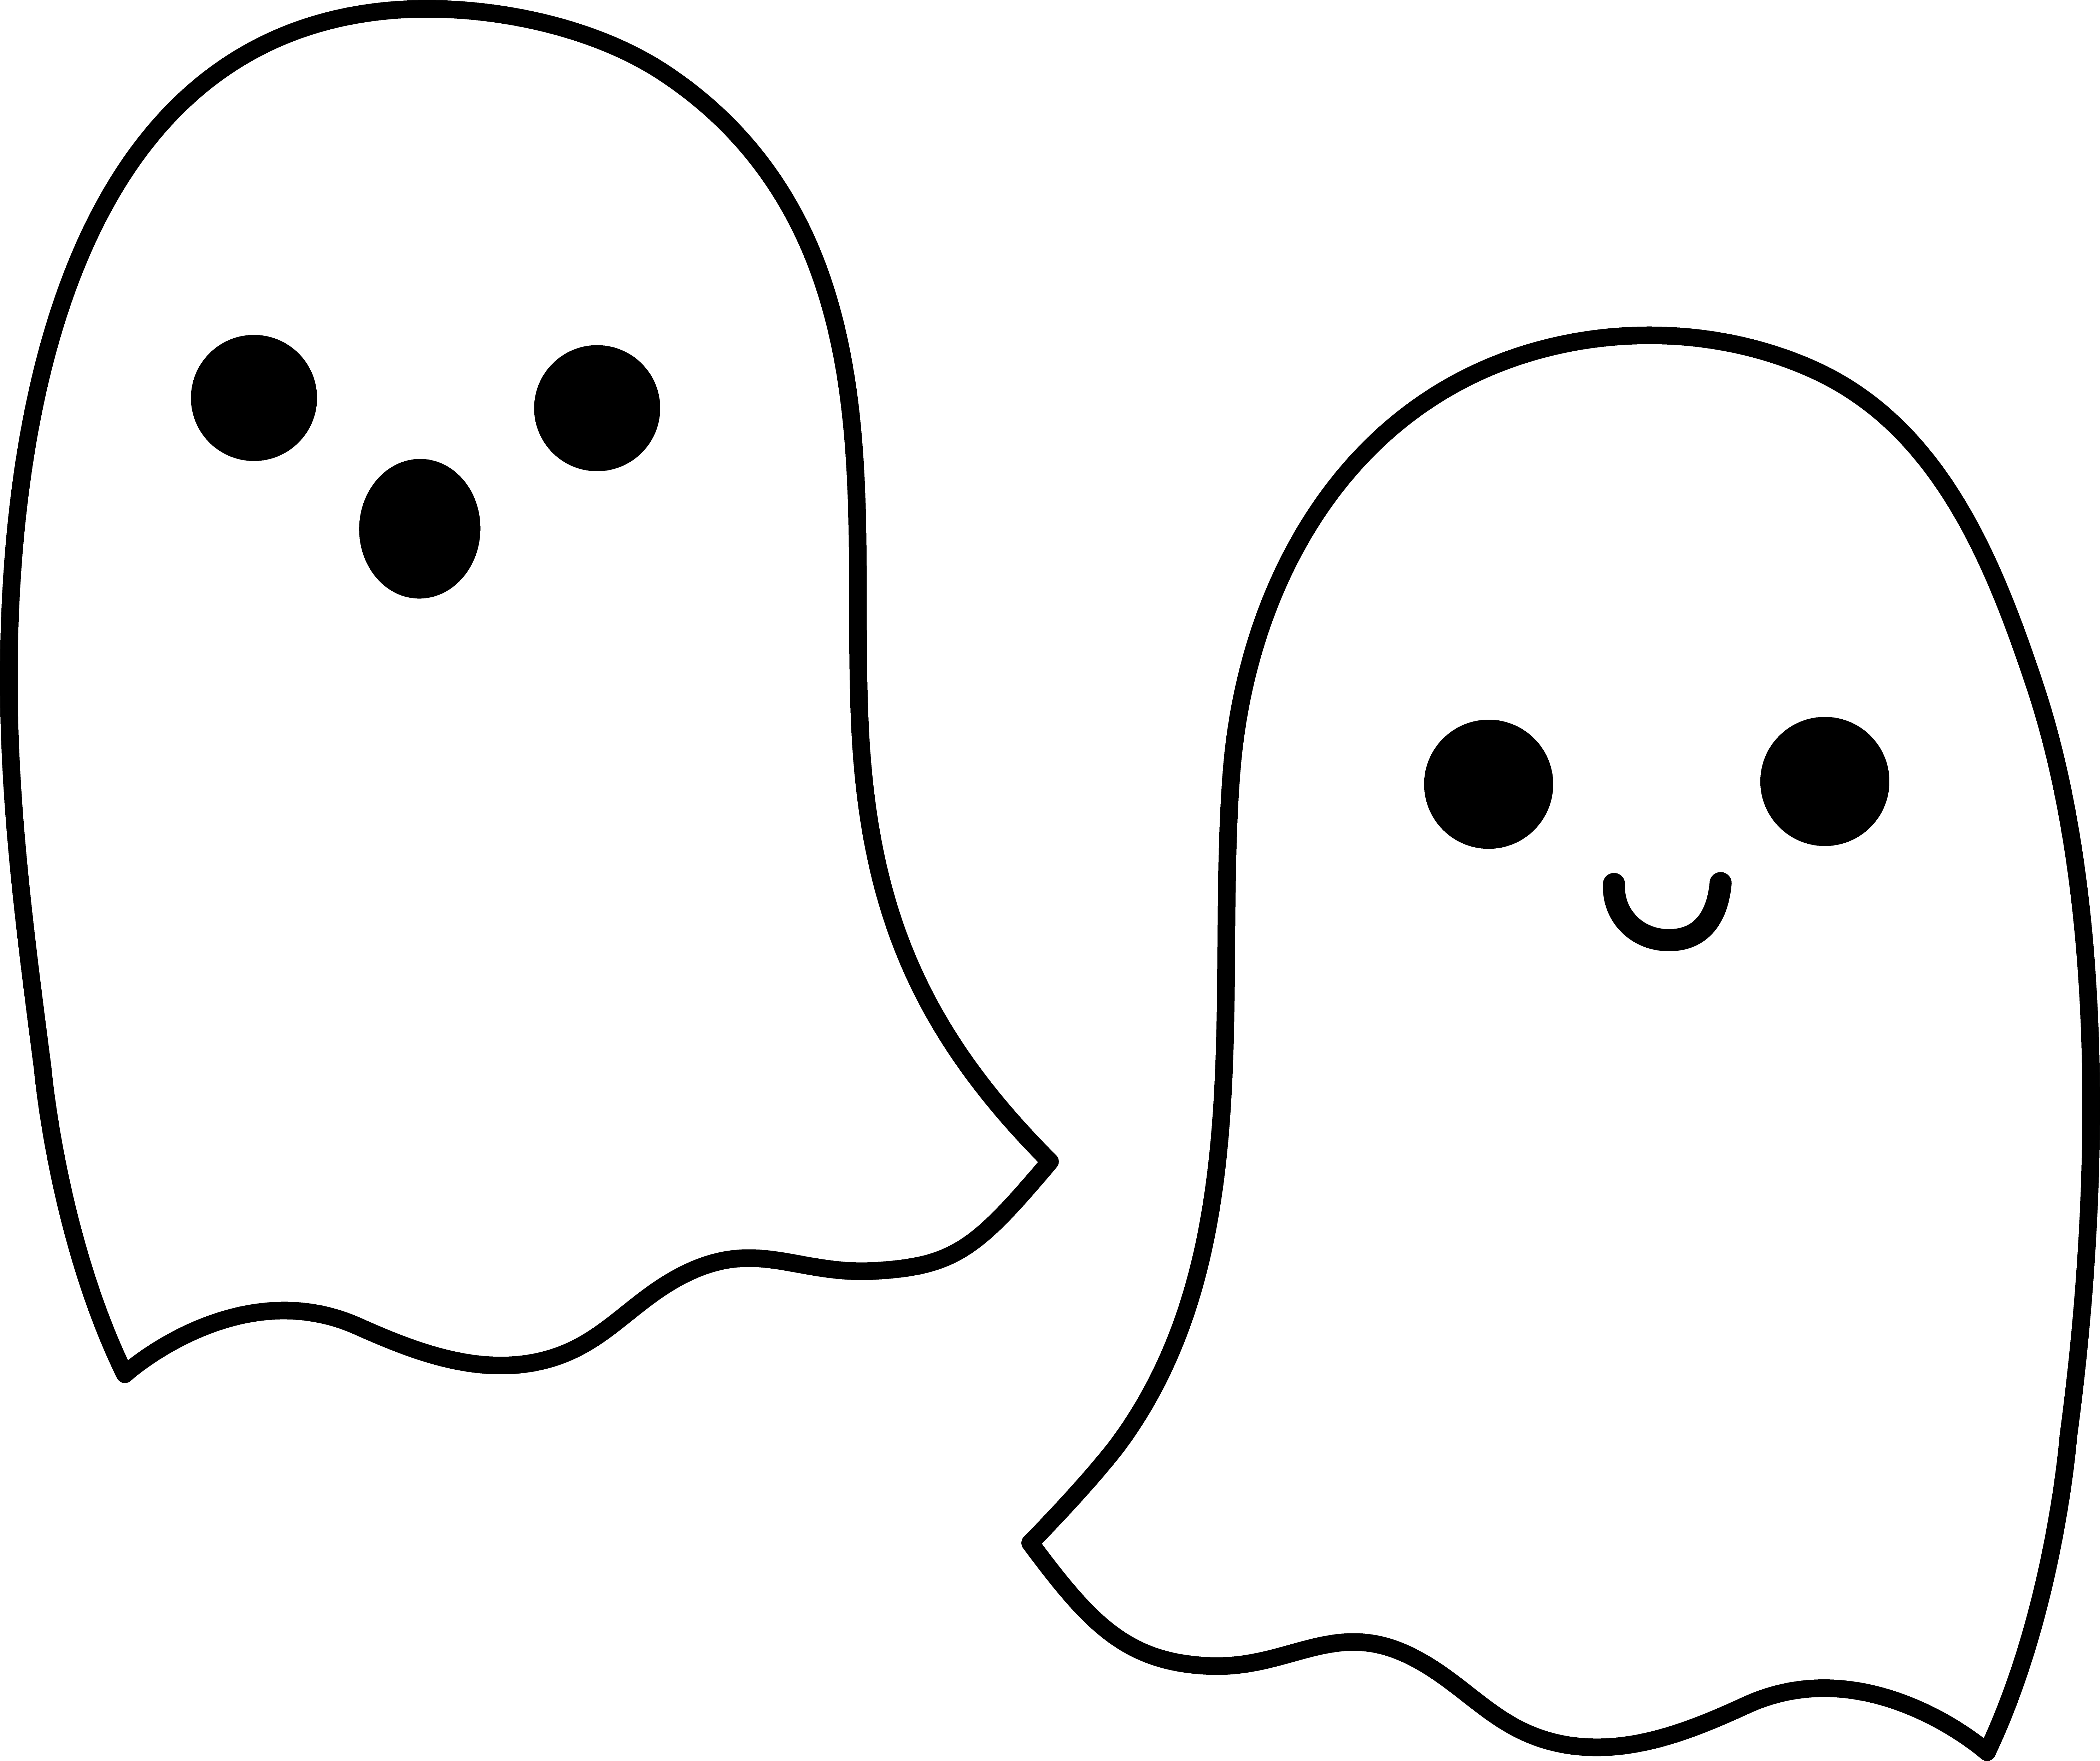 Ghost clipart cute icon